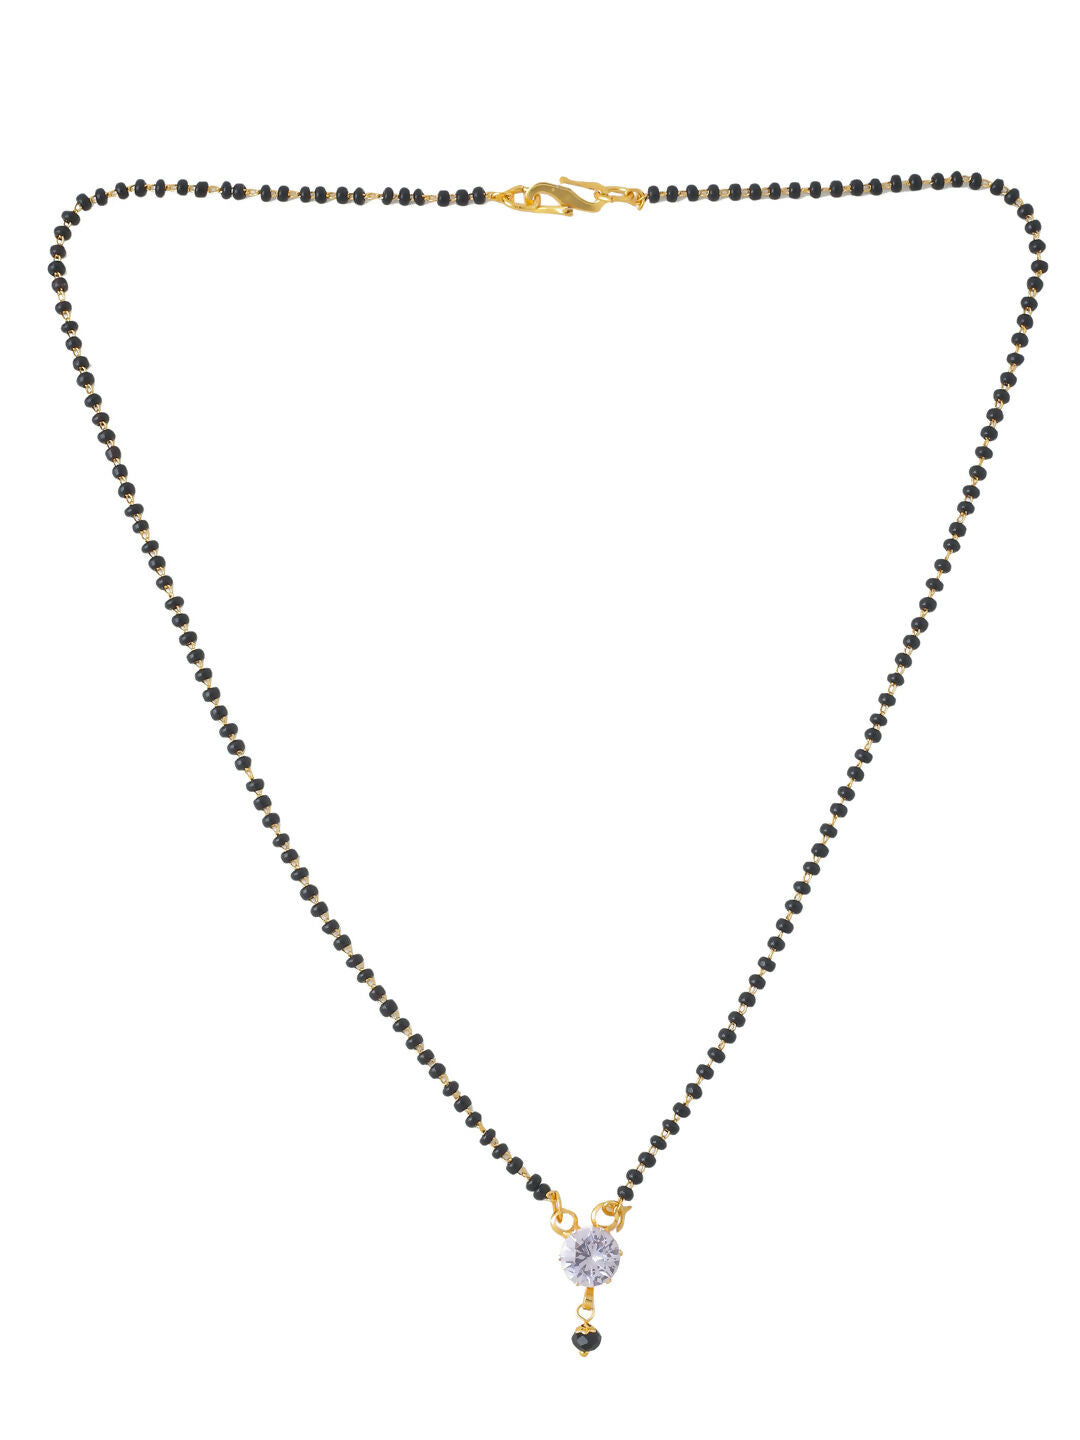 NVR Women's's Set of 2 Black Gold-Plated Beaded Mangalsutra With Ad Stone - Distacart